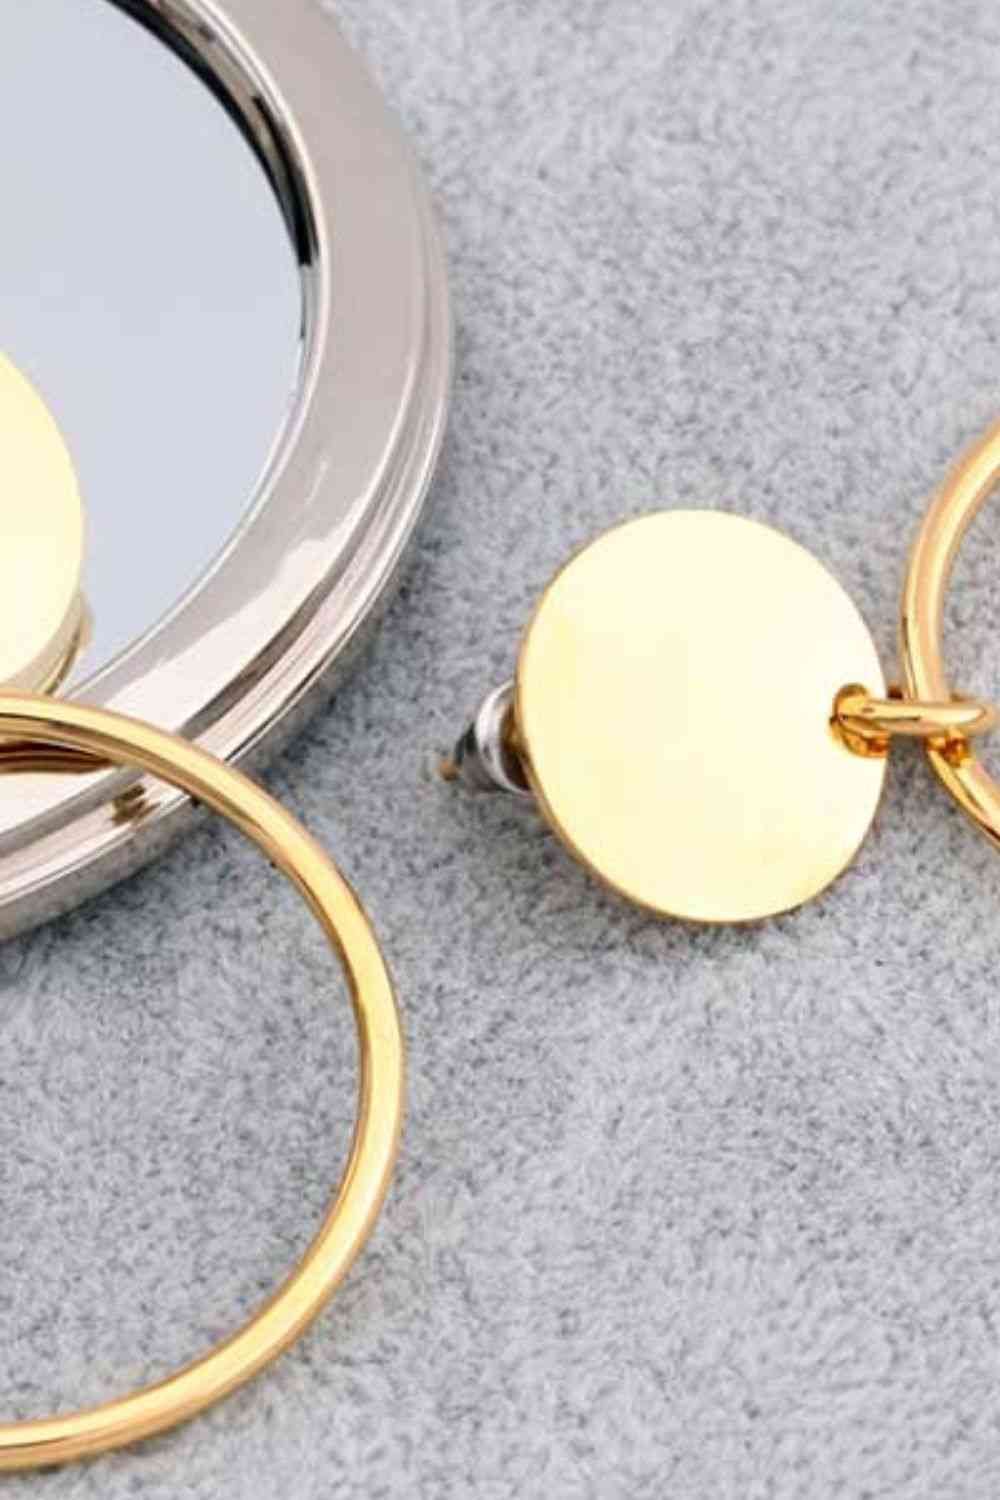 Gold-Plated Stainless Steel Drop Earrings - Everyday-Sales.com